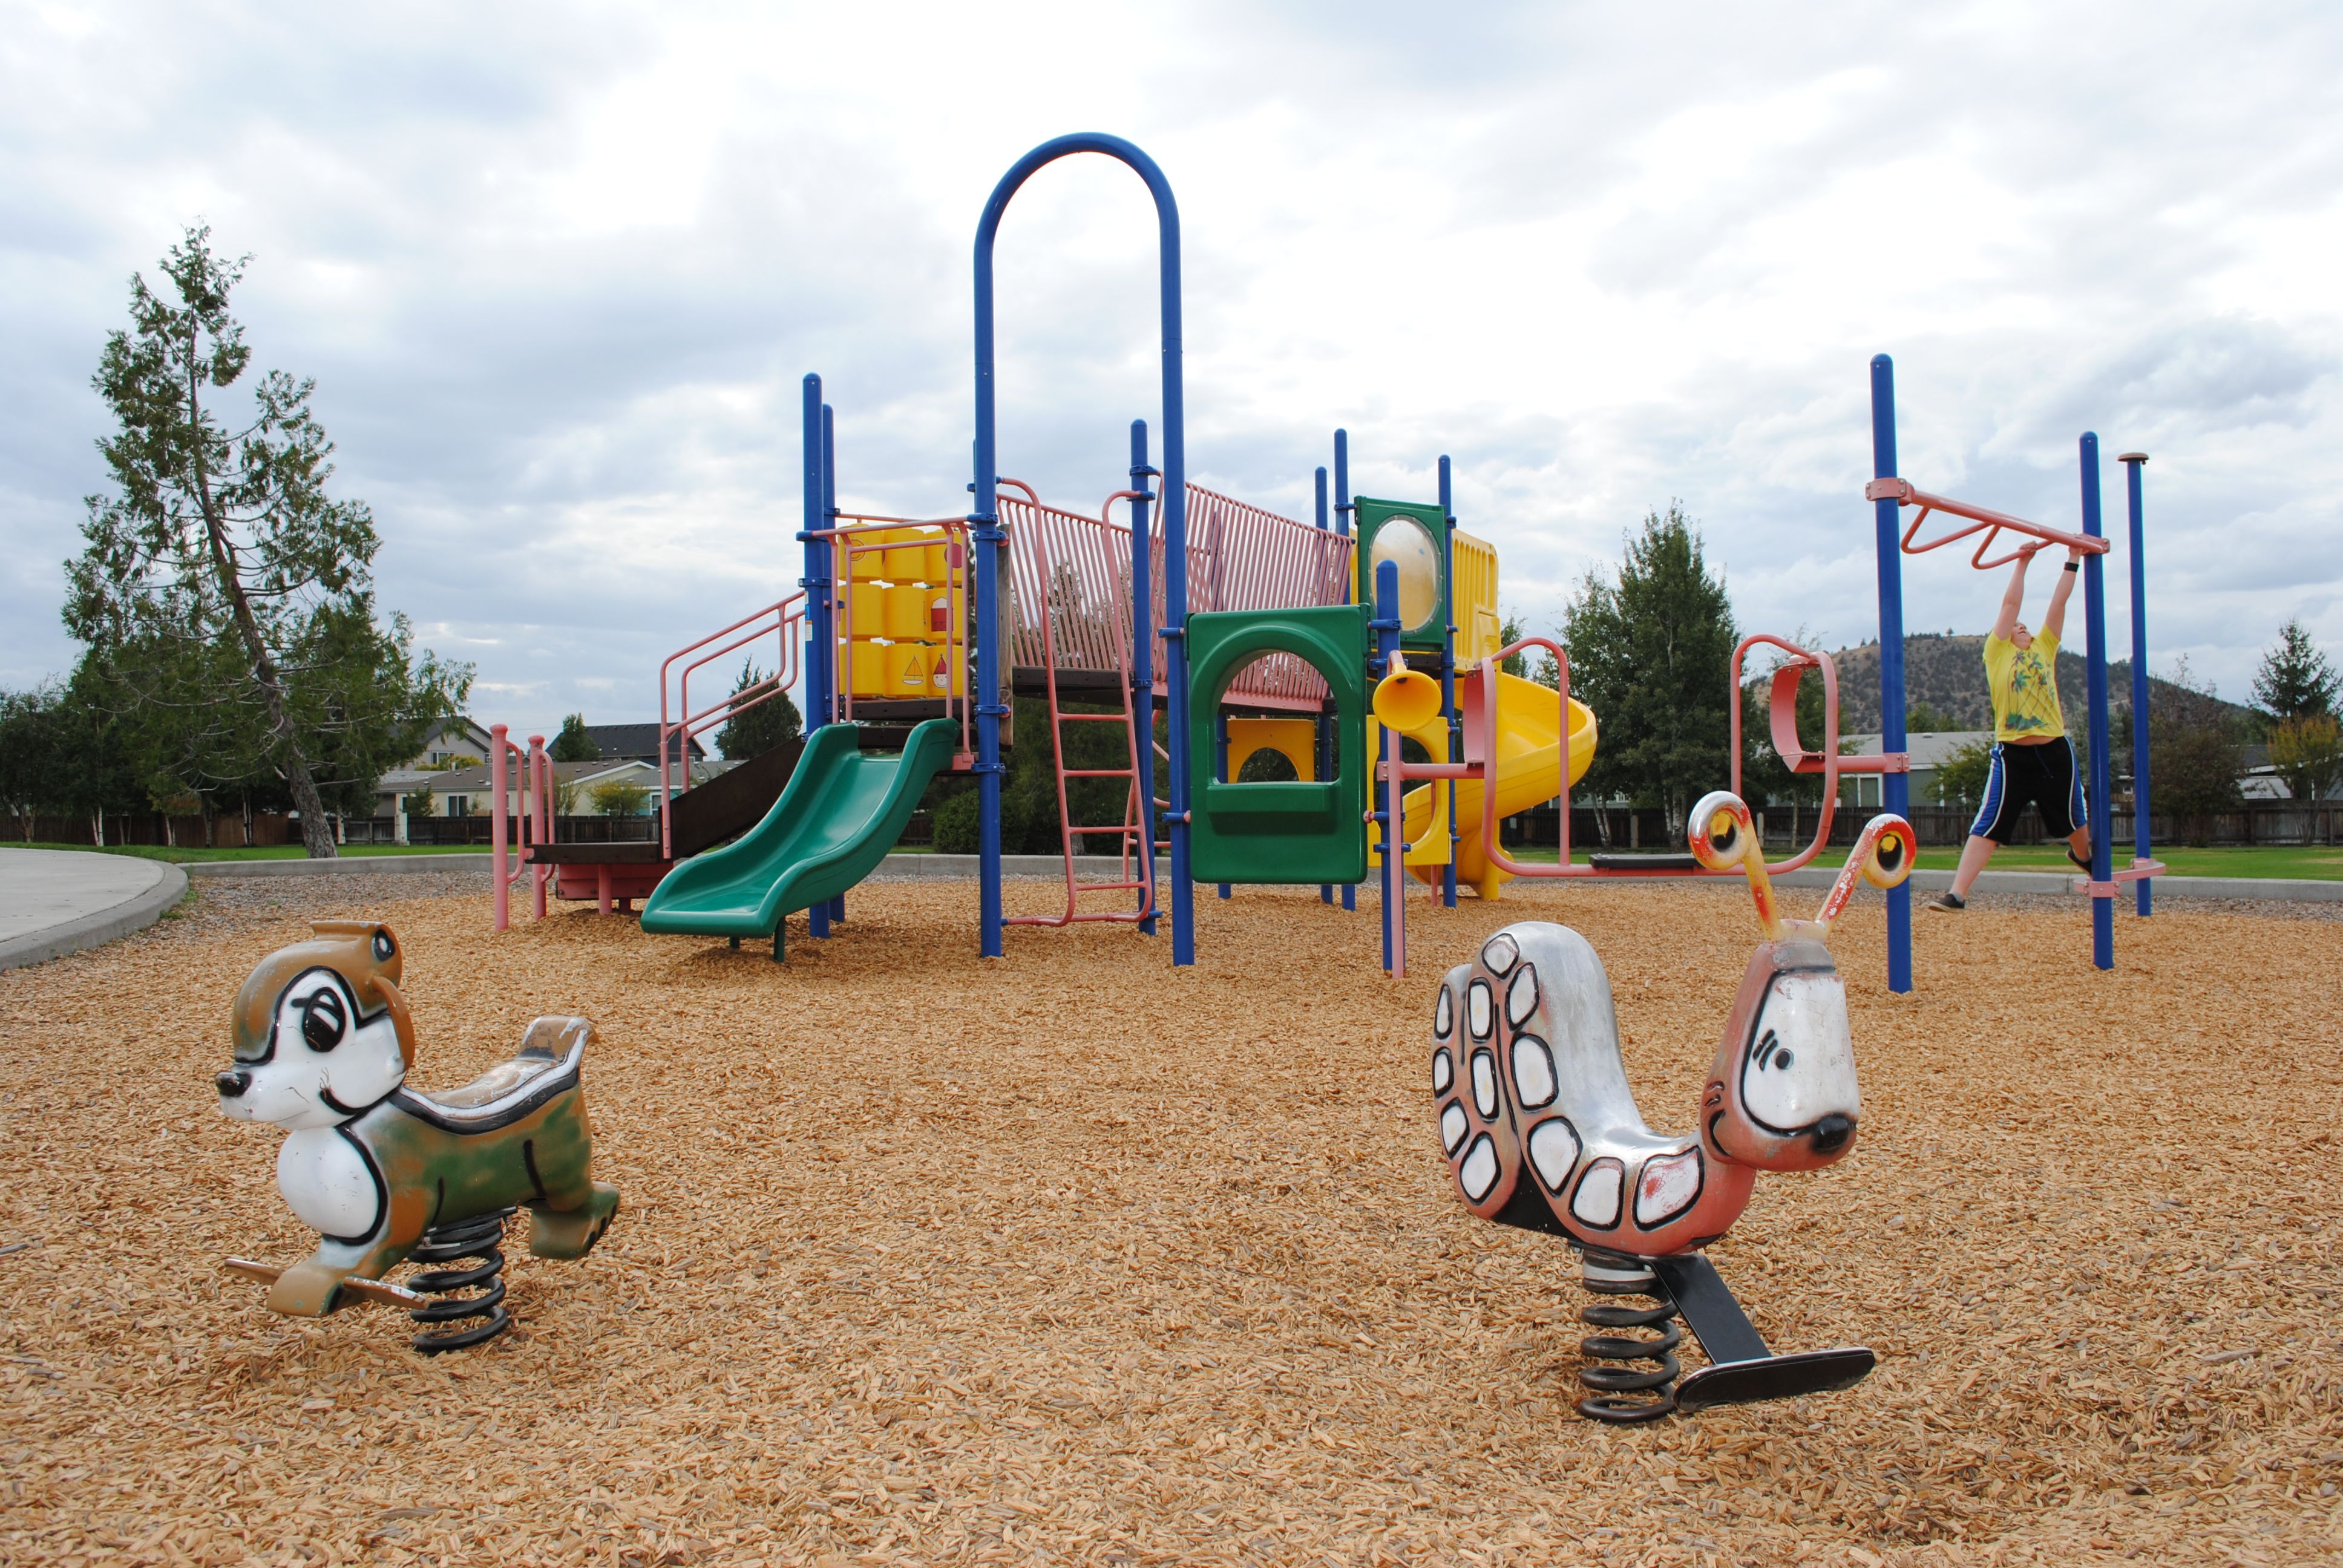 a slide, monkey bars and other toys at a playground